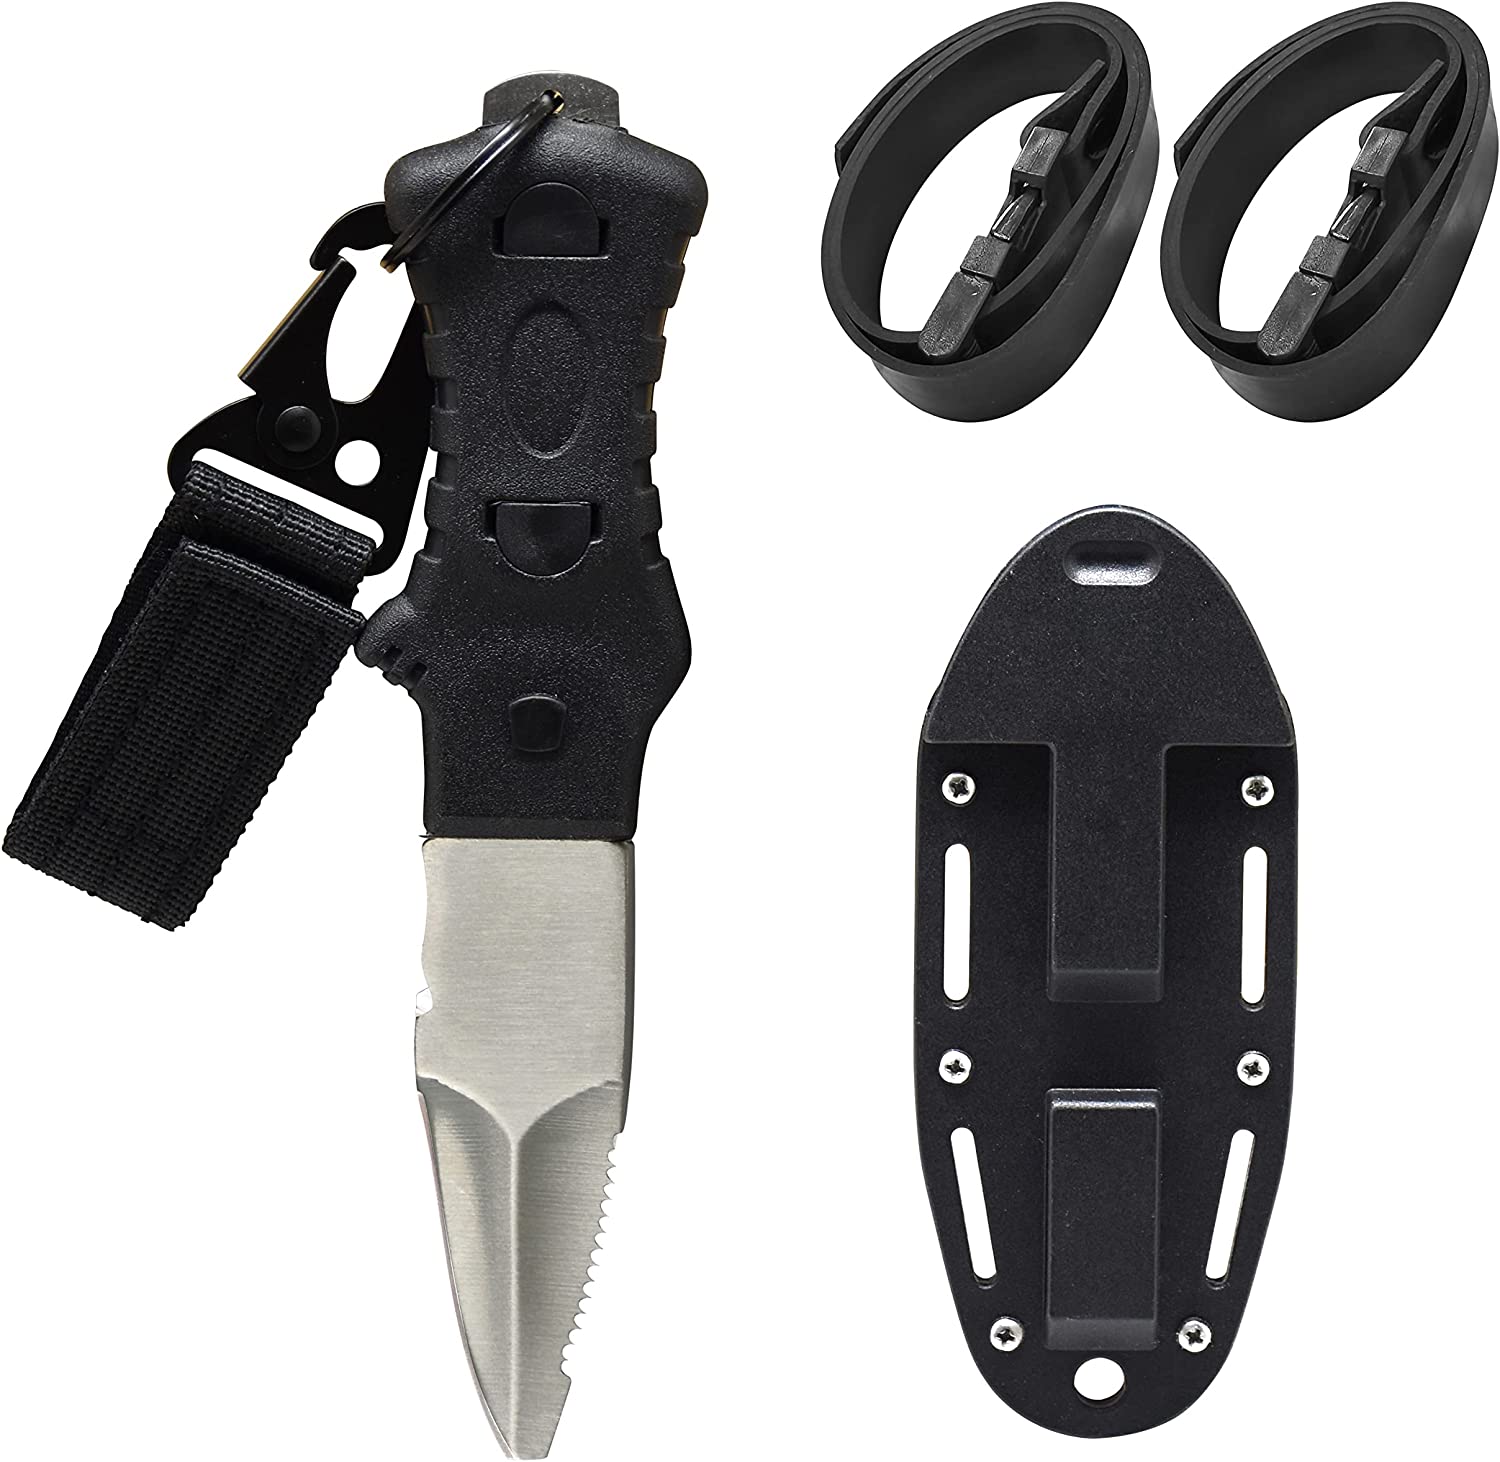  Dive Knife Scuba Diving Knife, Black Tactical Sharp Blade  knives, Divers dive tool with 2 Types Sheaths,Sawing Edge and 2 Pairs Leg  Straps for Snorkeling,Hunting,Camping : Sports & Outdoors